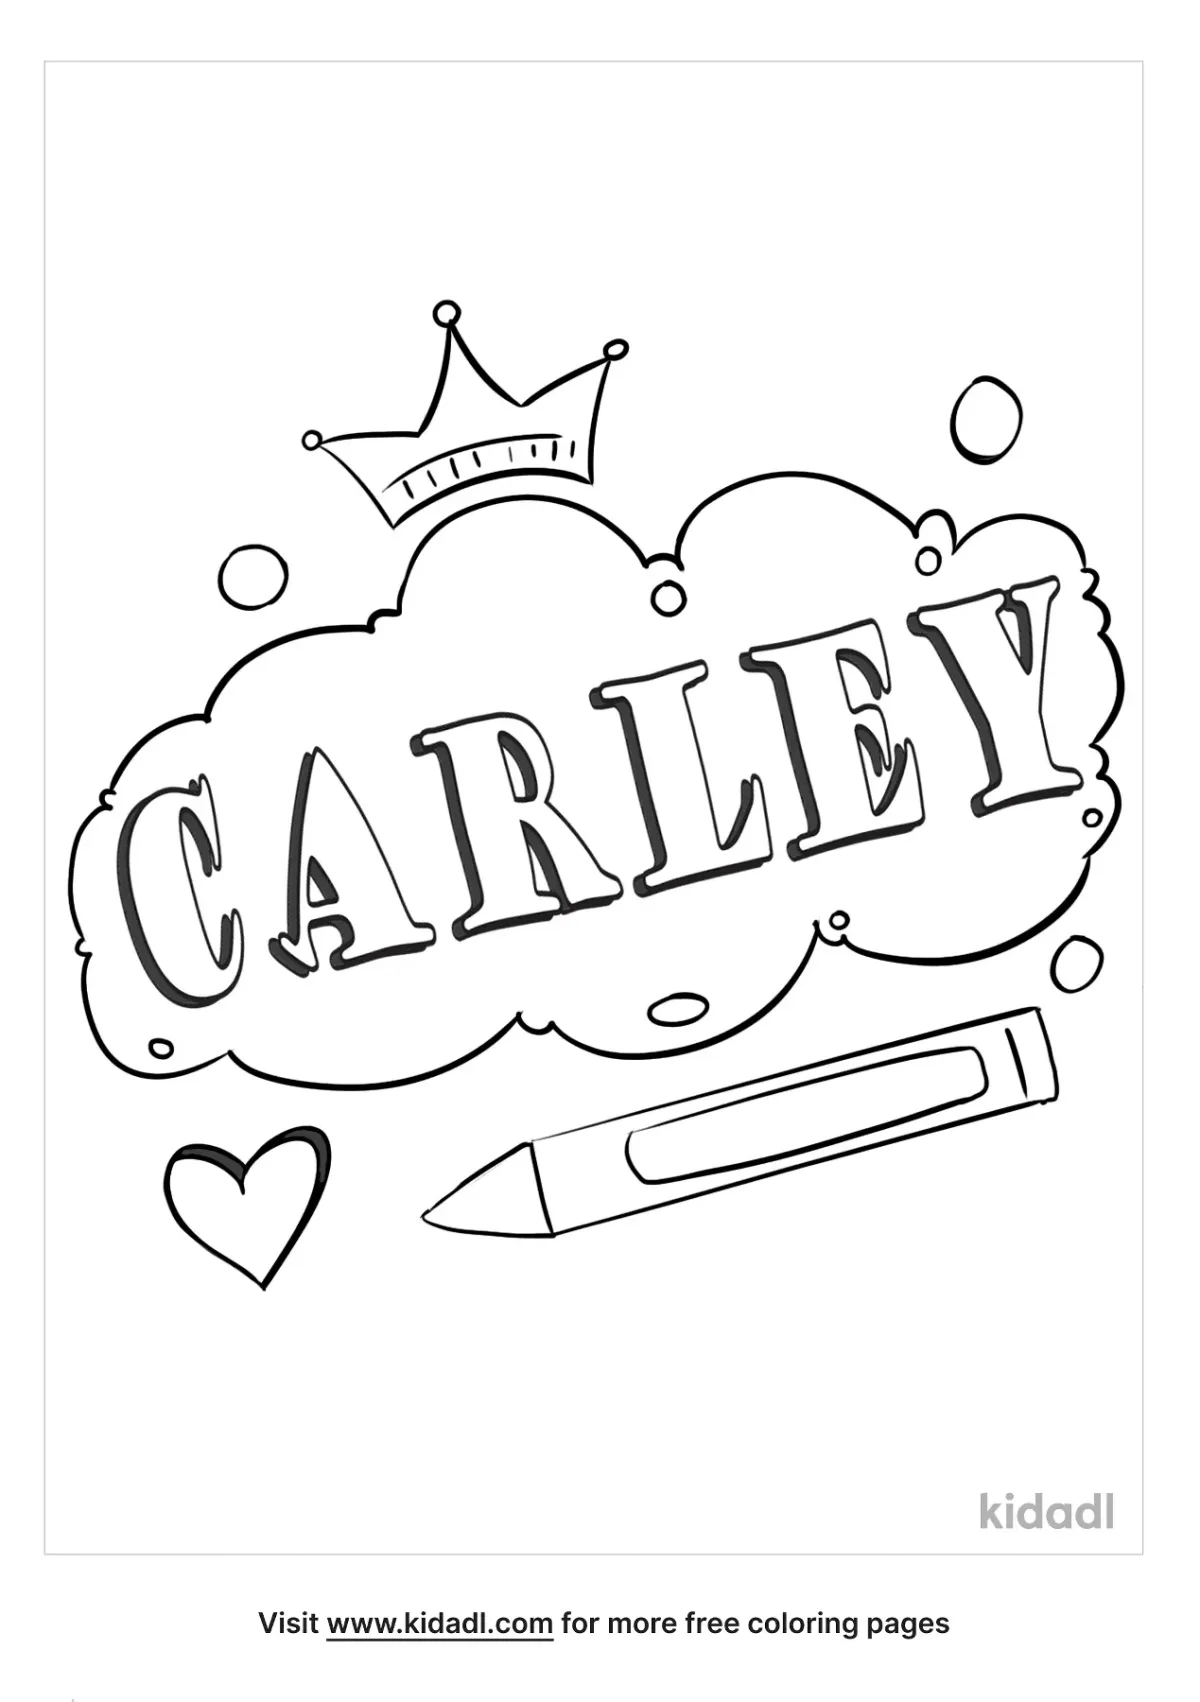 Carley Coloring Page